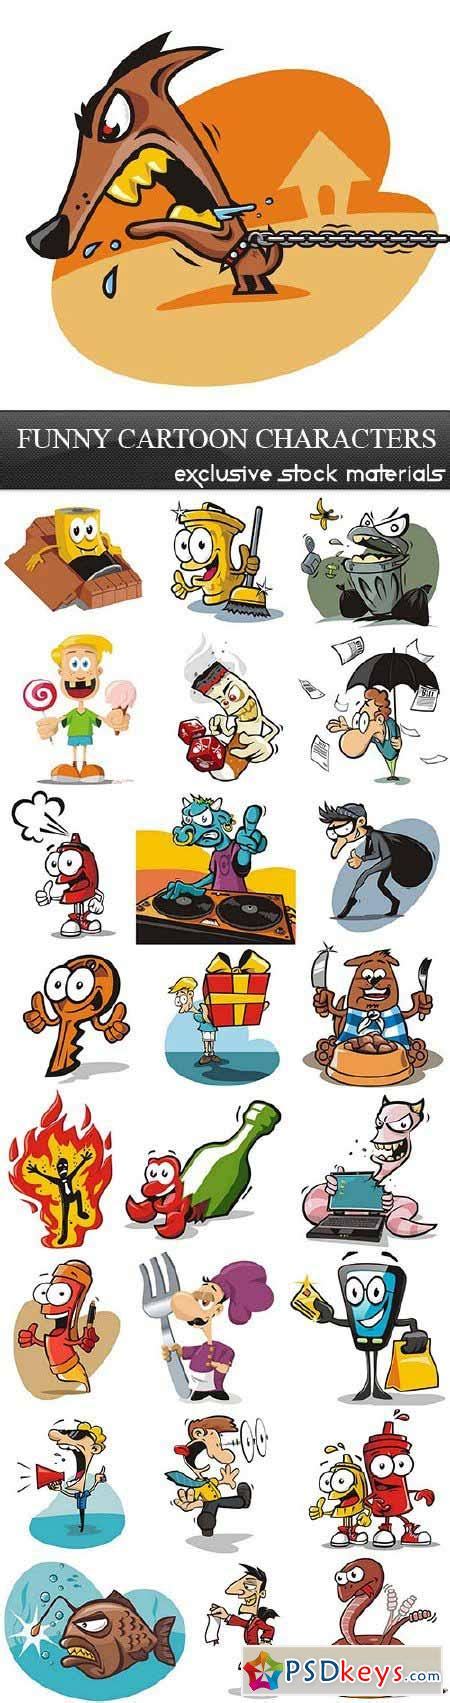 Funny Cartoon Characters 25xeps Free Download Photoshop Vector Stock